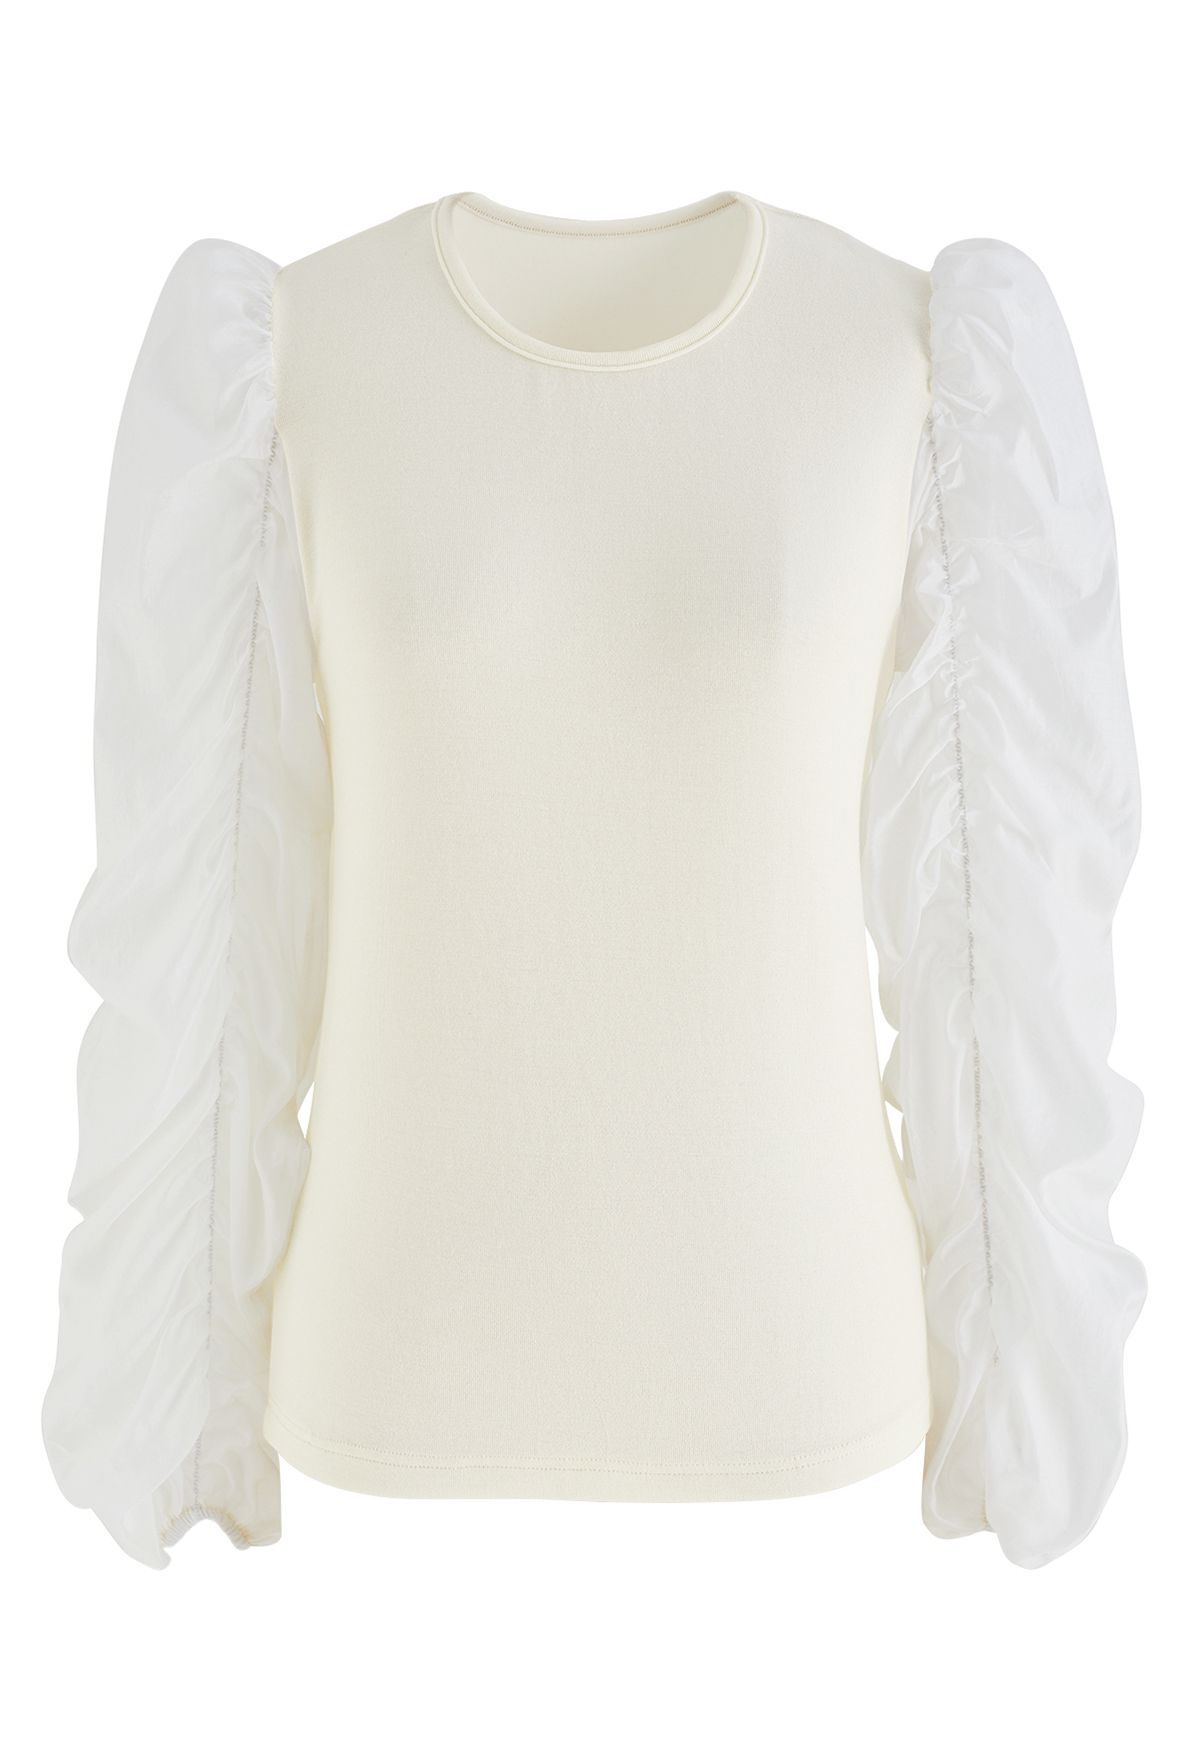 Bubble Sleeves Soft Touch Spliced Top in Cream